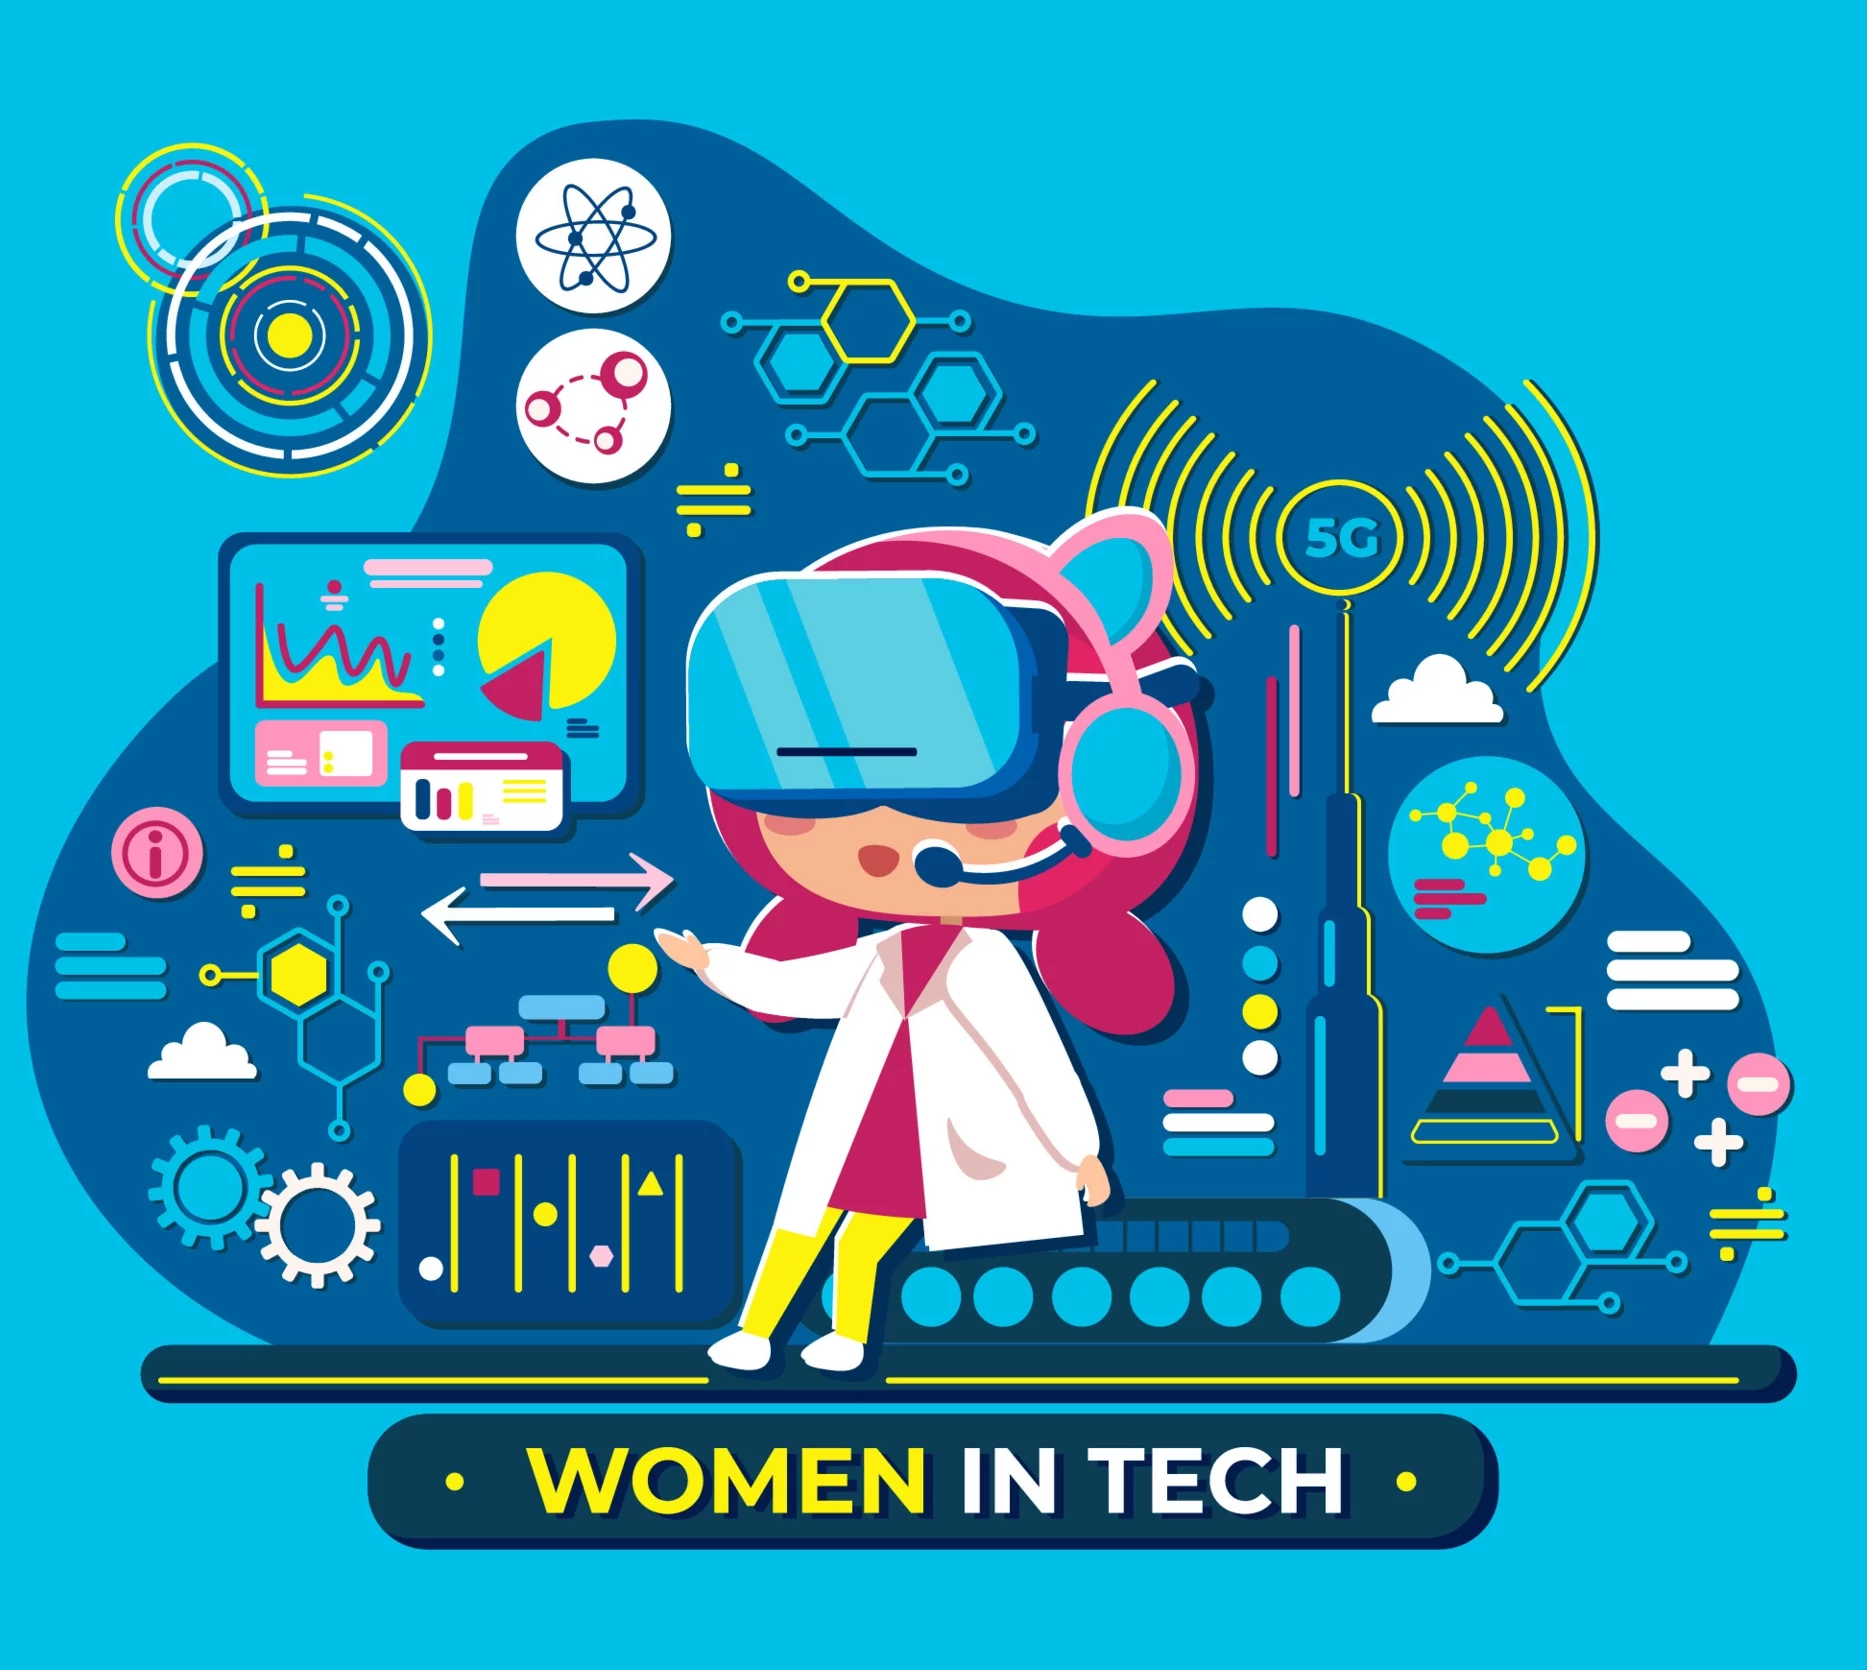 How to Have More Women in Tech?